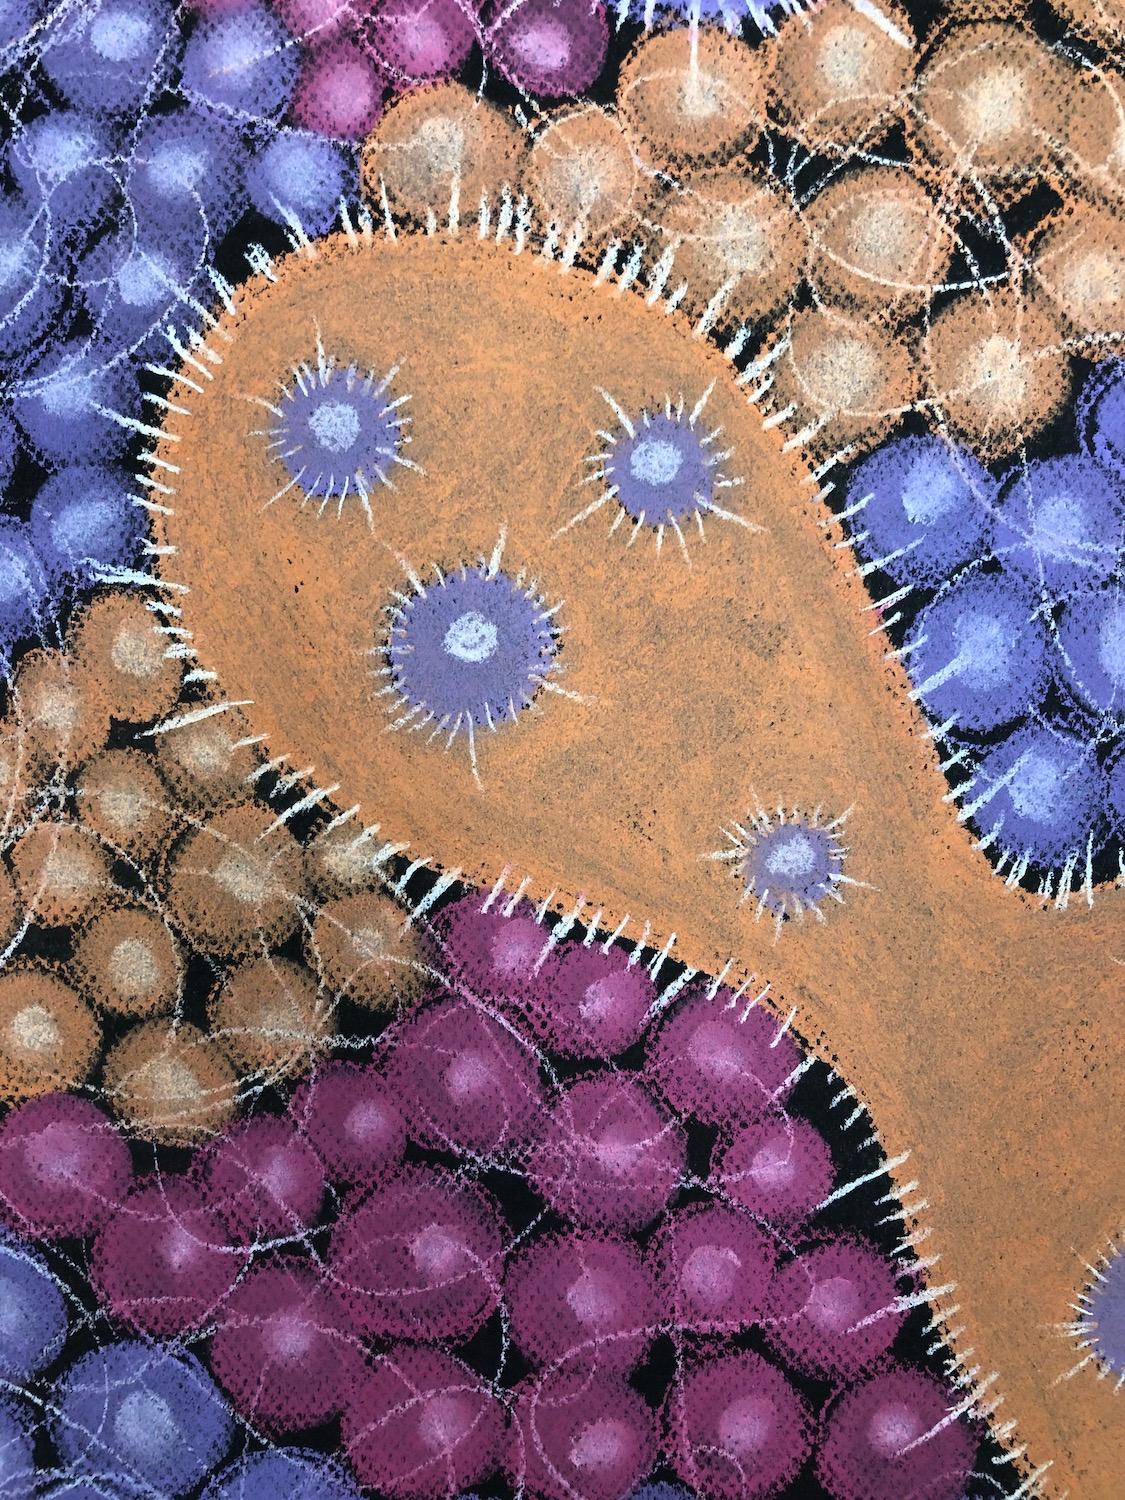 Kay Hartung’s “Microbial Gathering 1” is a 19.5 x 25 inch pastel drawing done on black Canson Mi Teintes paper. In colors of orange, pink, purple and white, the drawing is richly detailed with broad areas of color as well as fine lines. The use of